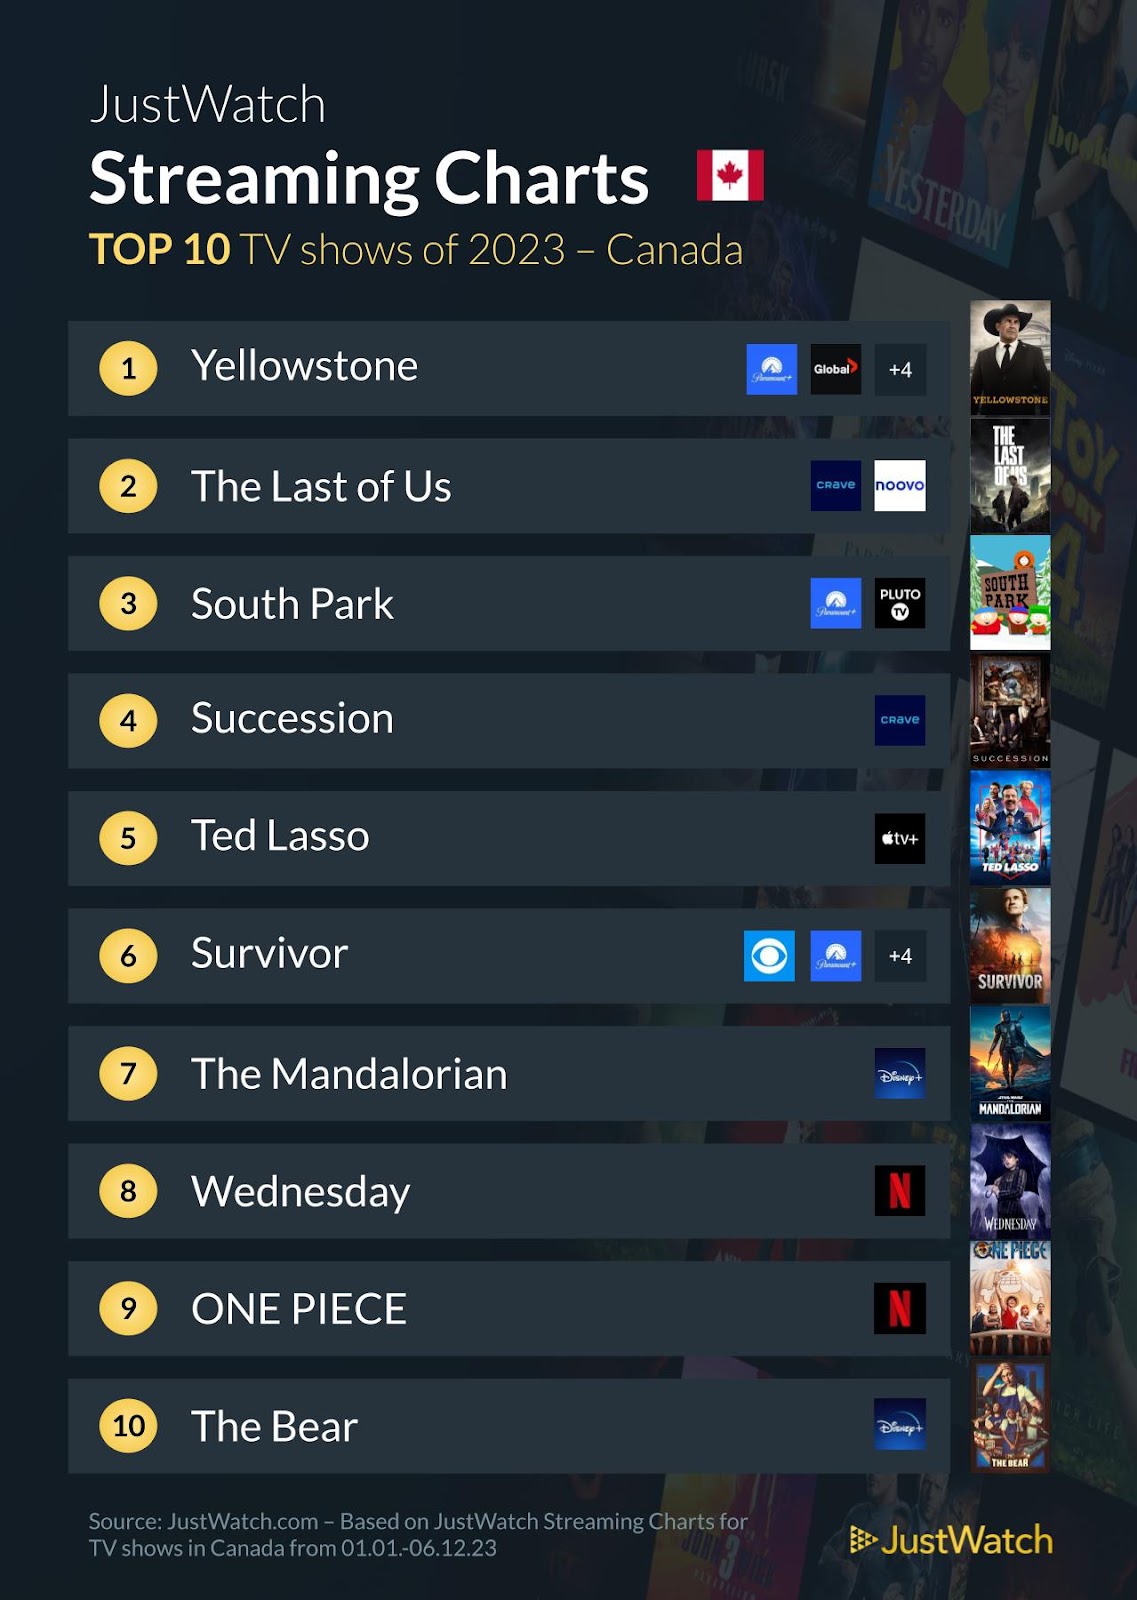 The Last of Us was the top trending TV show of 2023